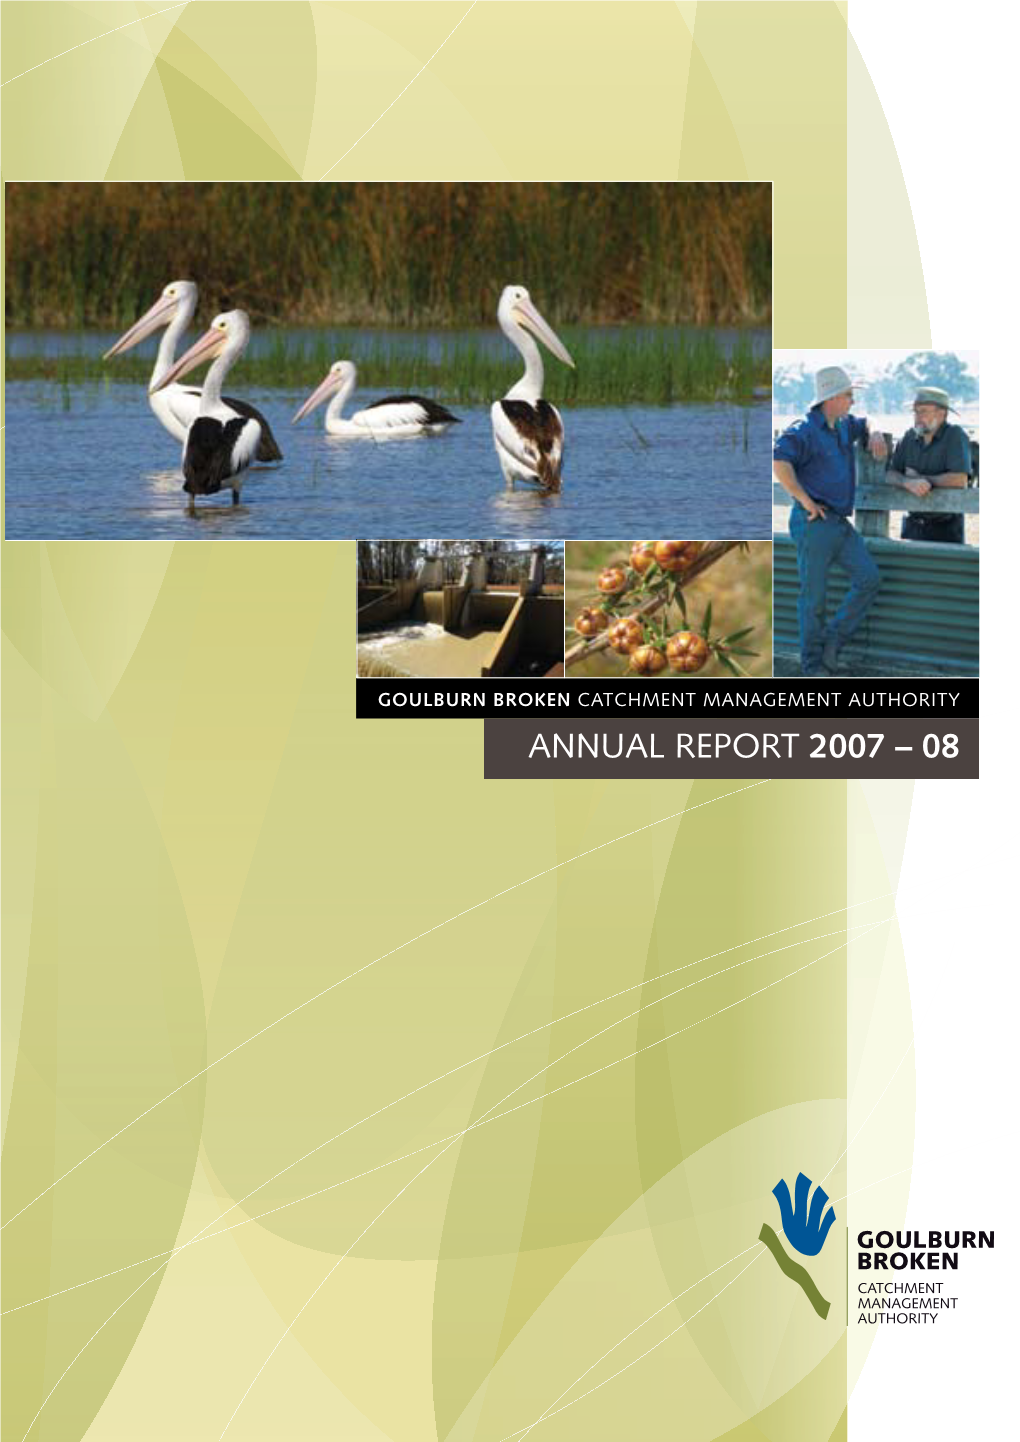 Annual Report 2007 – 08 Introduction and Summary G O U L B U R N B R O K E N C a T C H M E N T M a N a G E M E N T a U T H O R I T Y